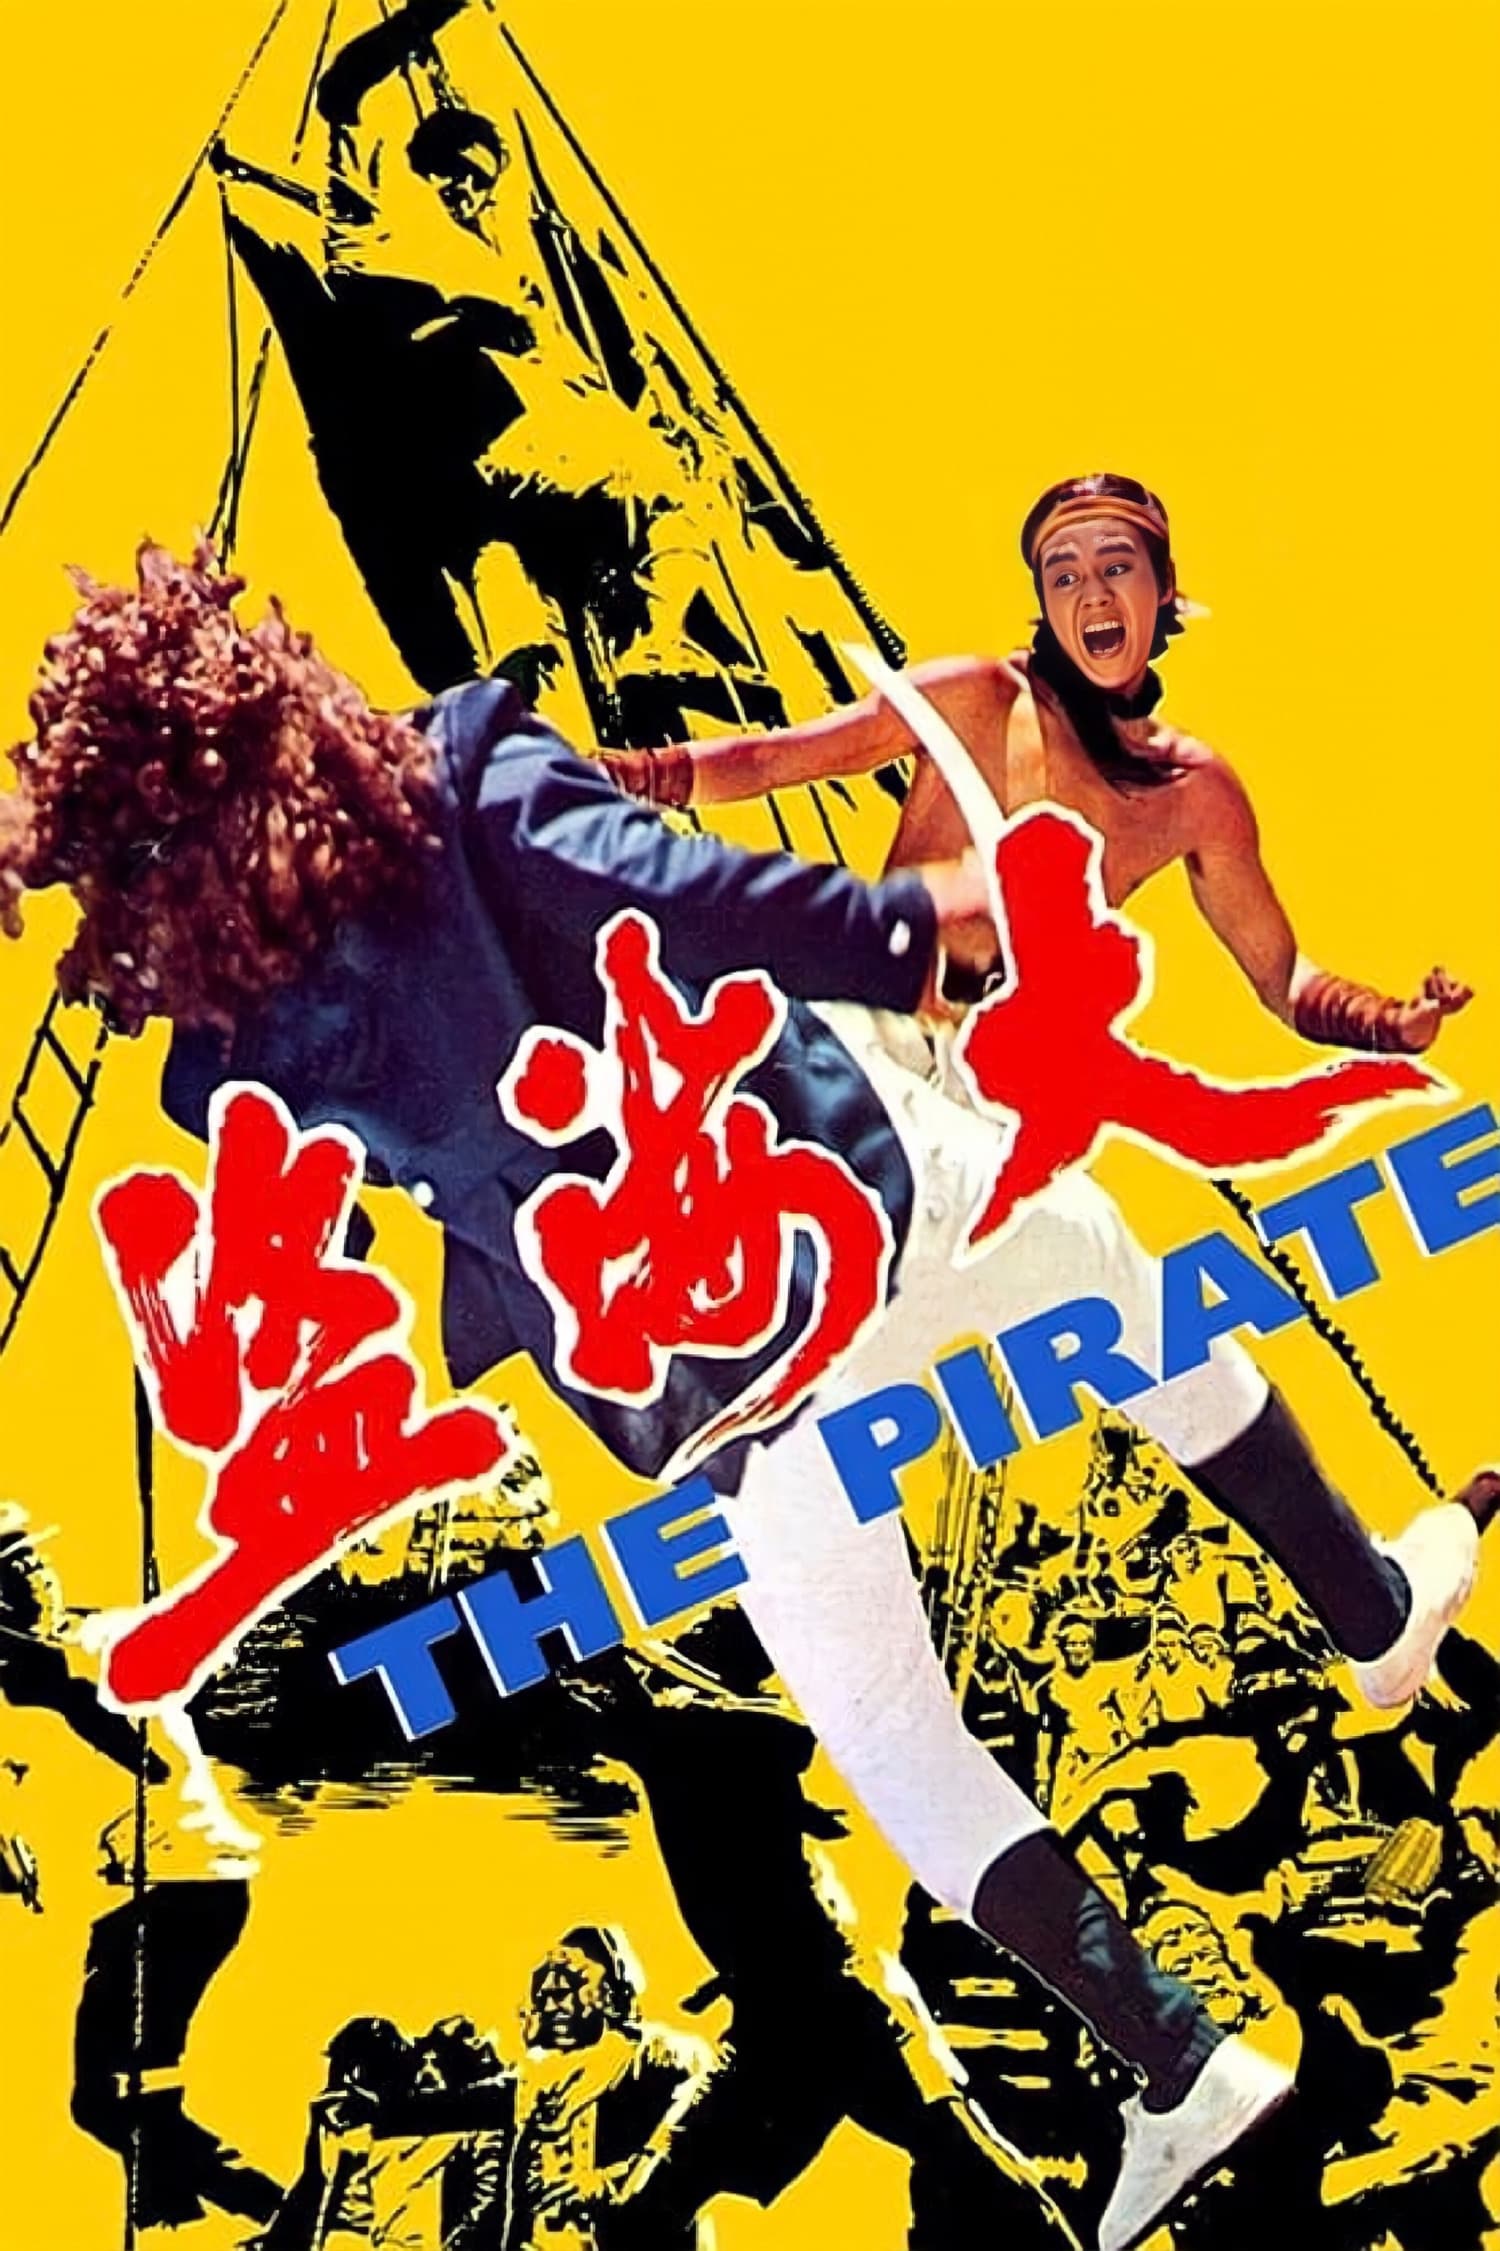 The Pirate (1973)